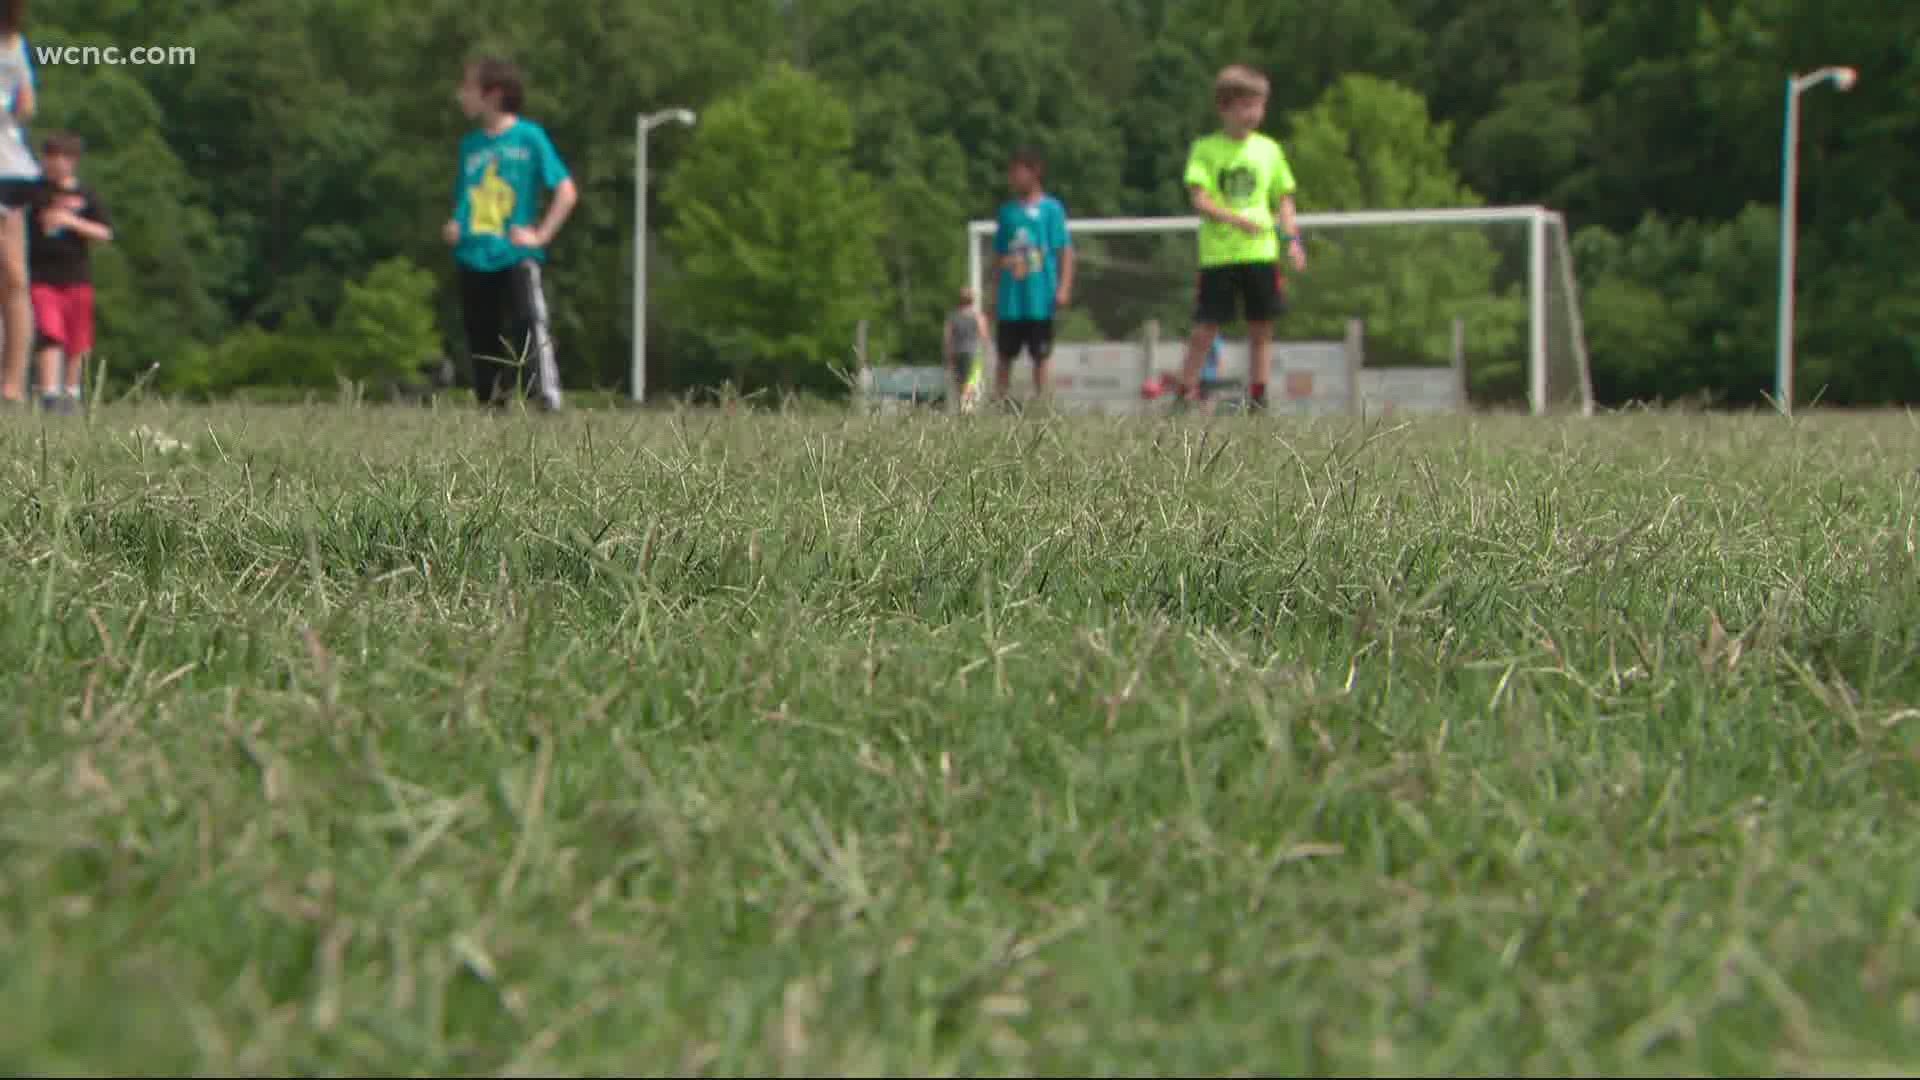 Parents are asking for refunds for spring-summer sports and camps that are canceled due to the coronavirus.